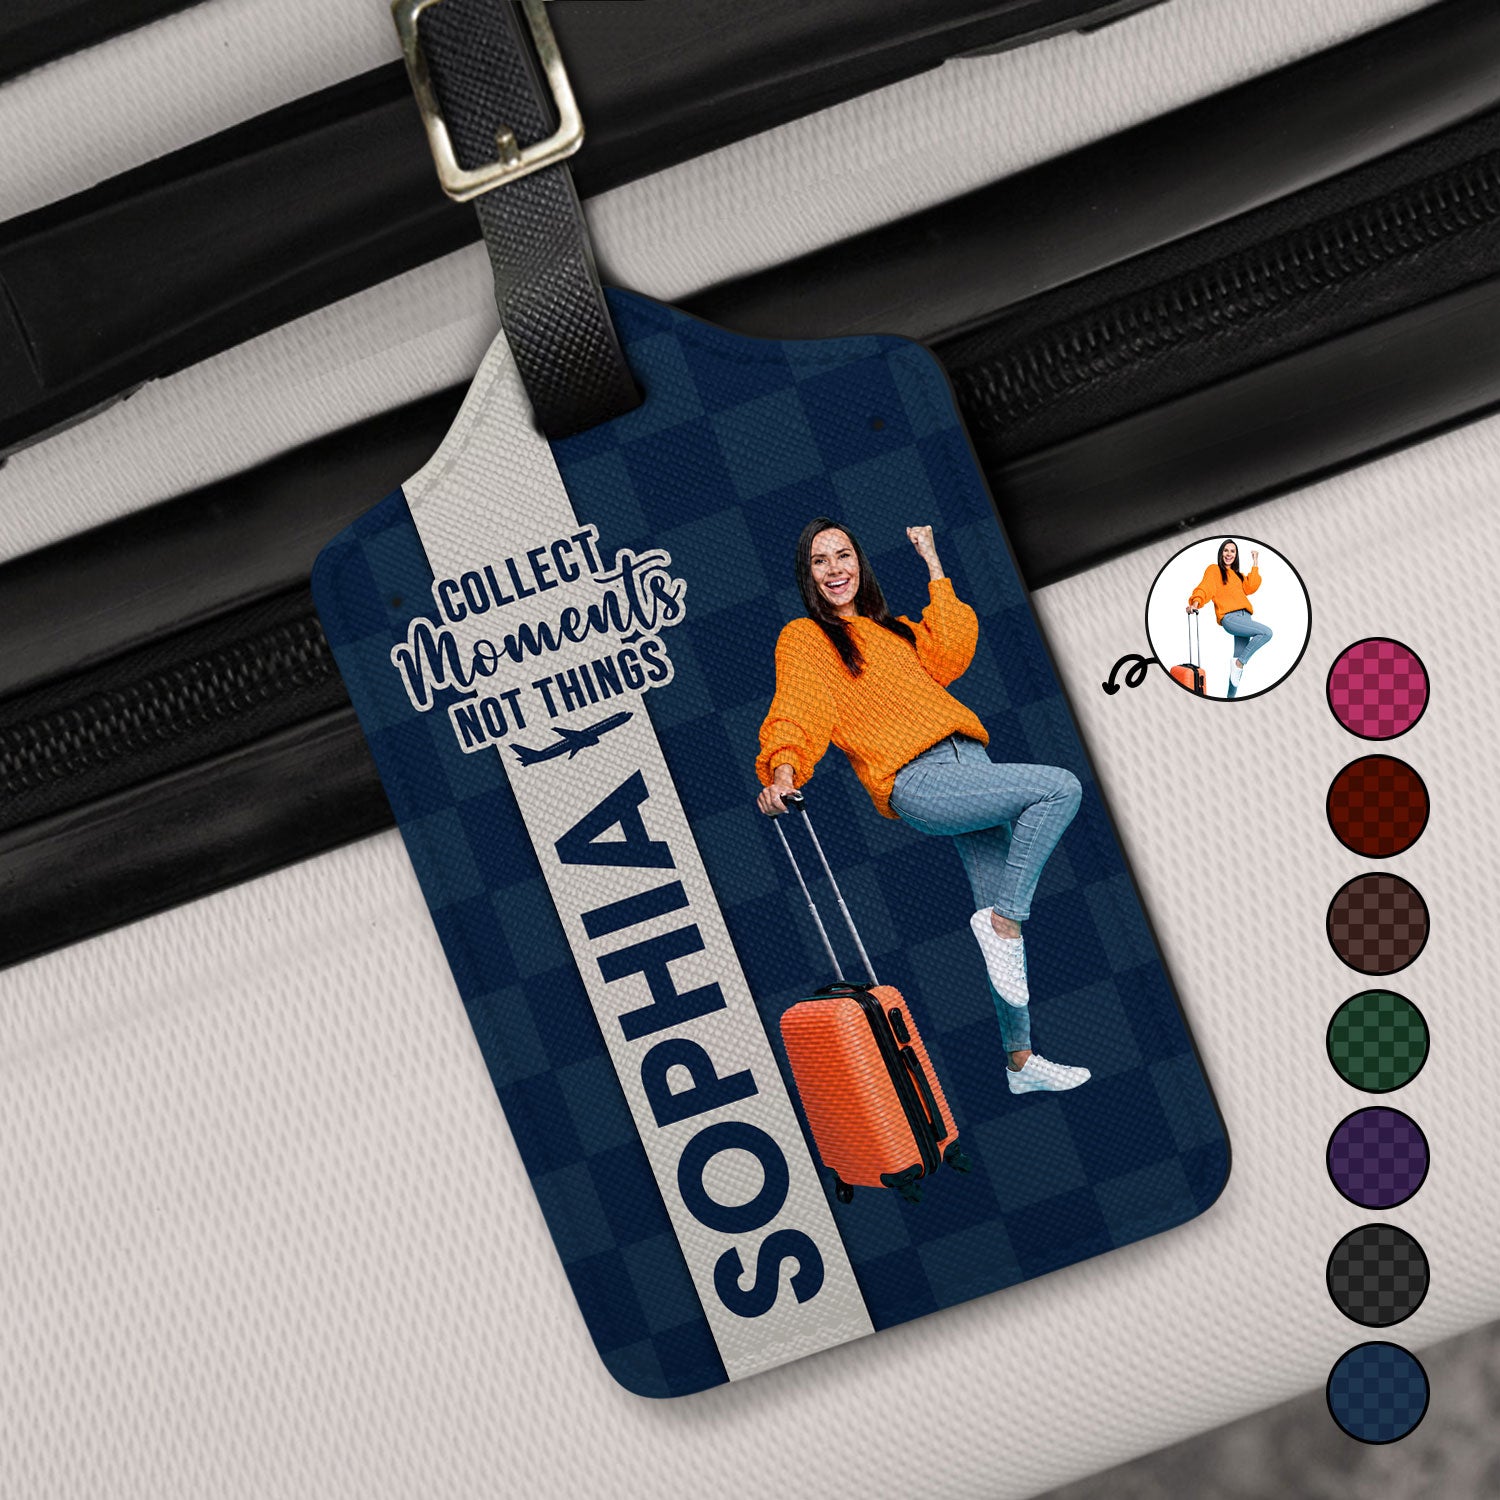 Custom Photo Collect Moments Not Things - Gift For Travellers, Travelling Lovers, Him, Her - Personalized Luggage Tag